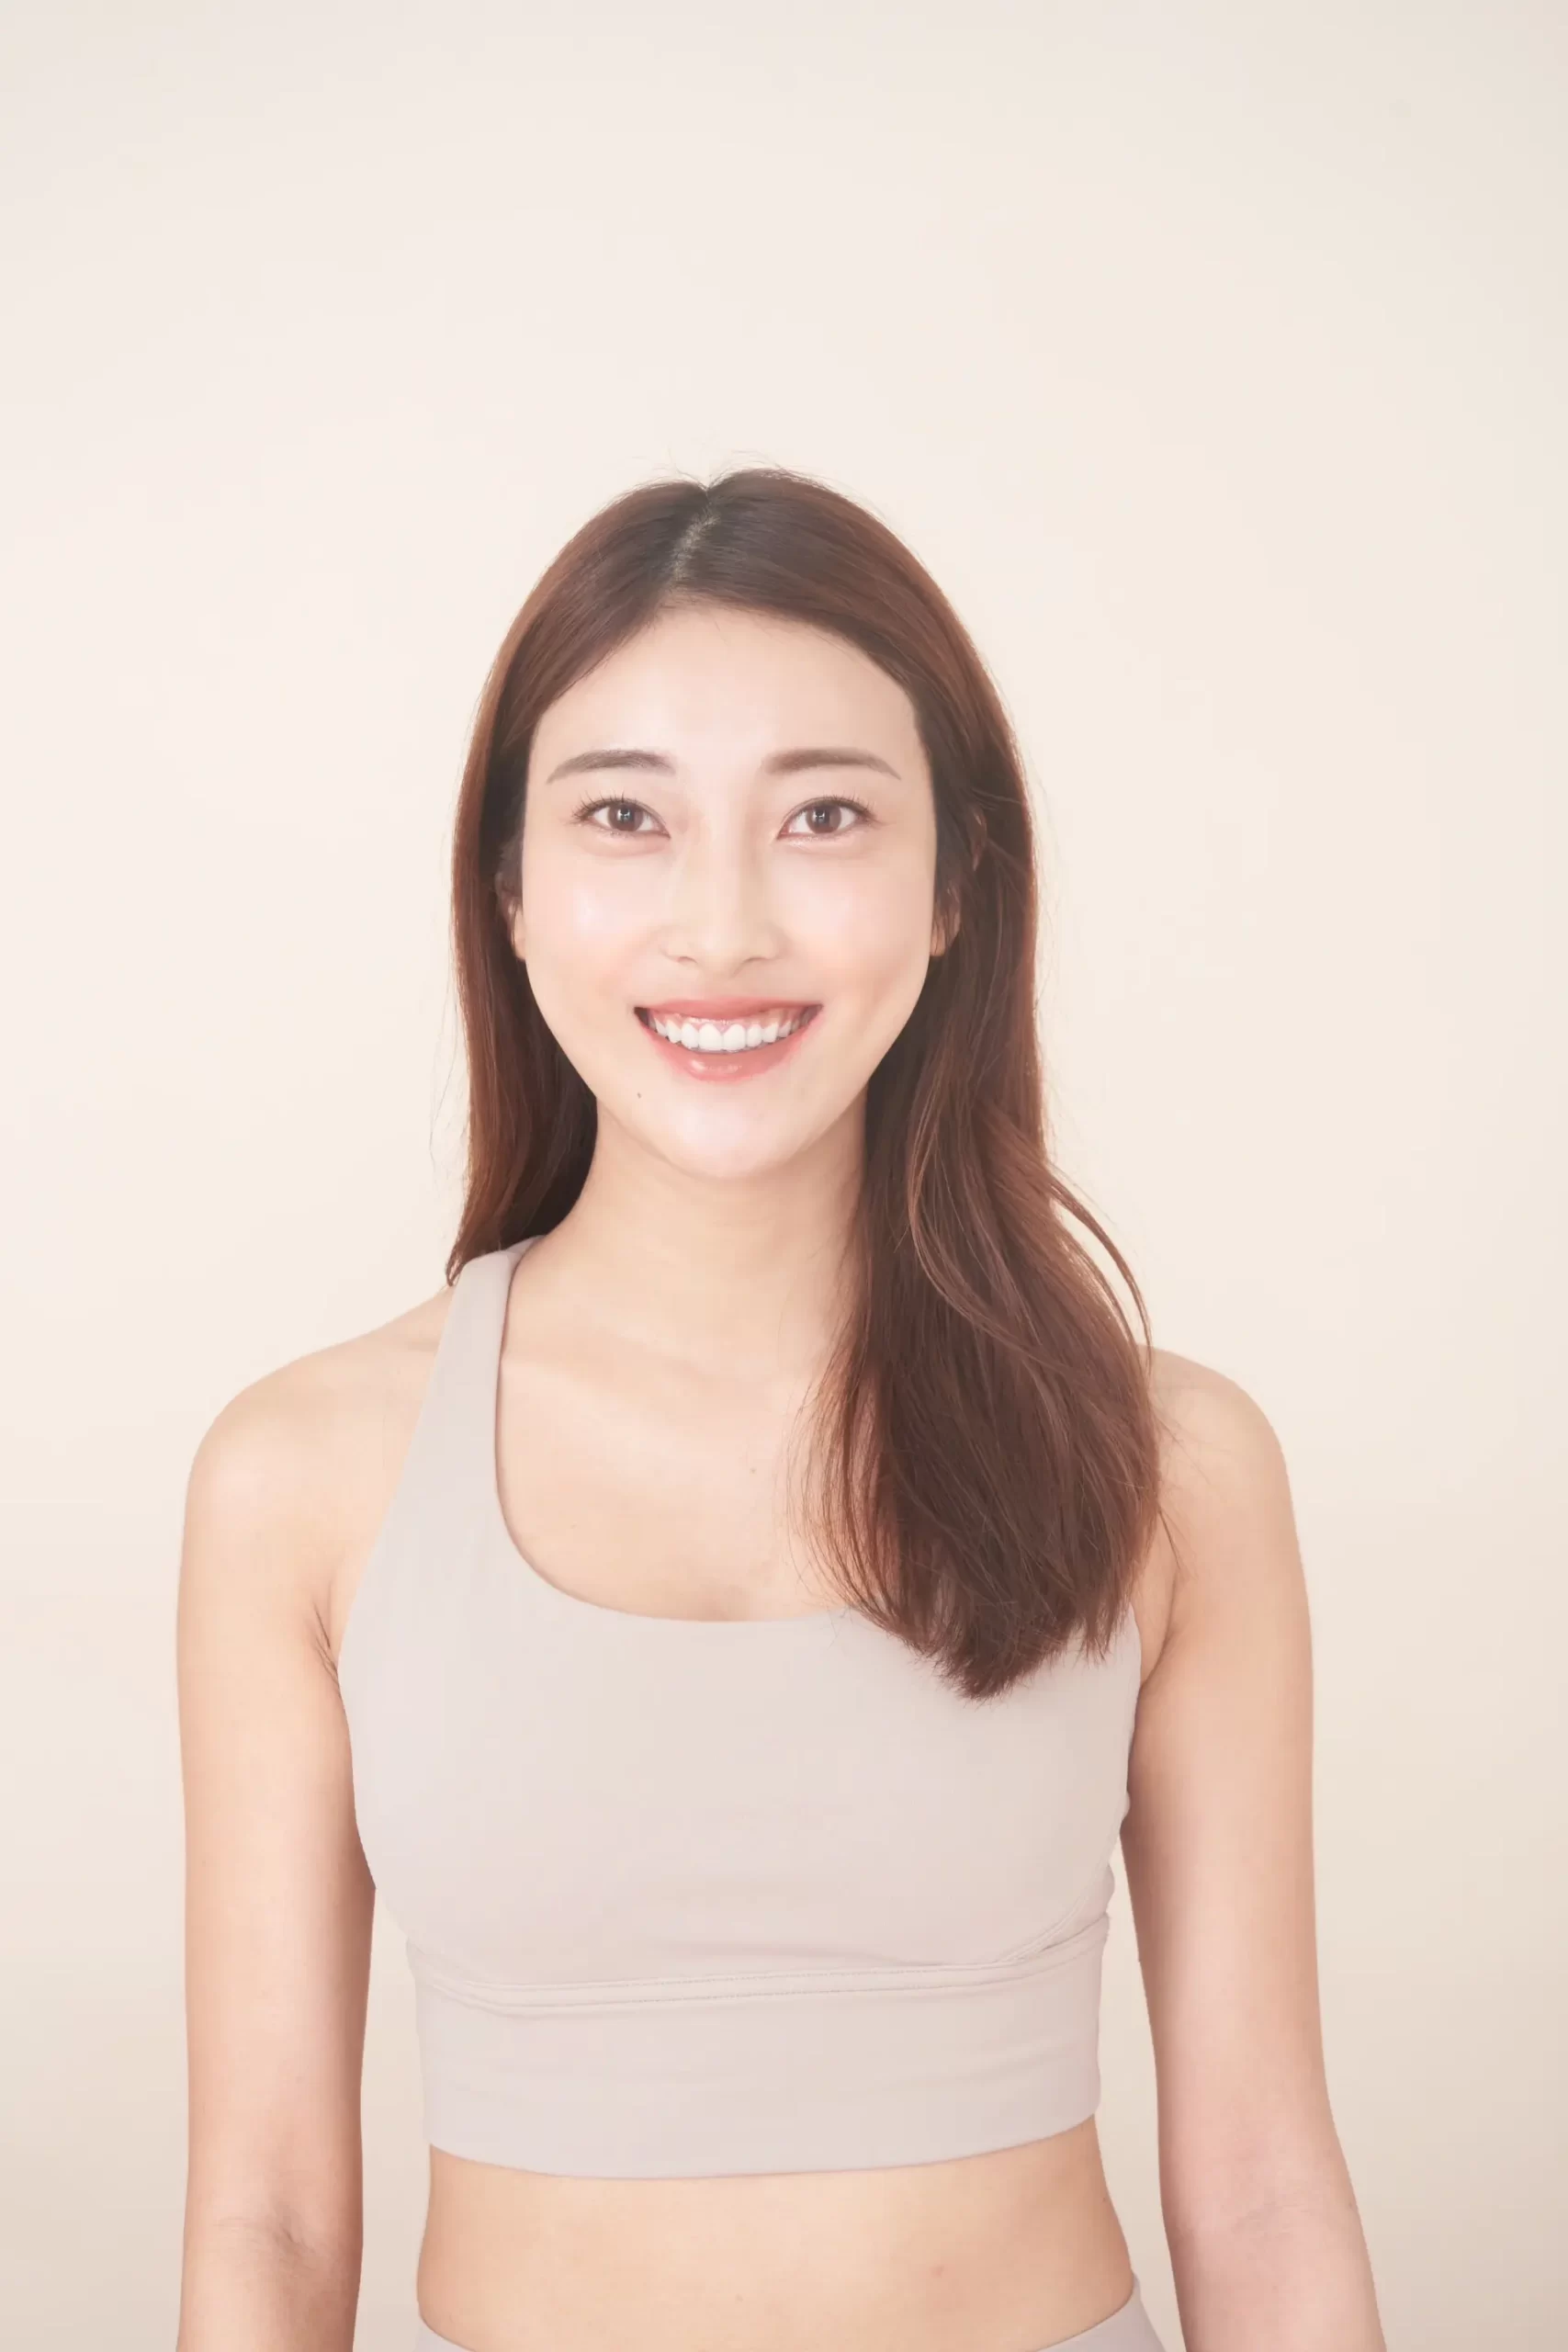 Anti-Aging Face Exercise In Your 30's!! masumi face exercise